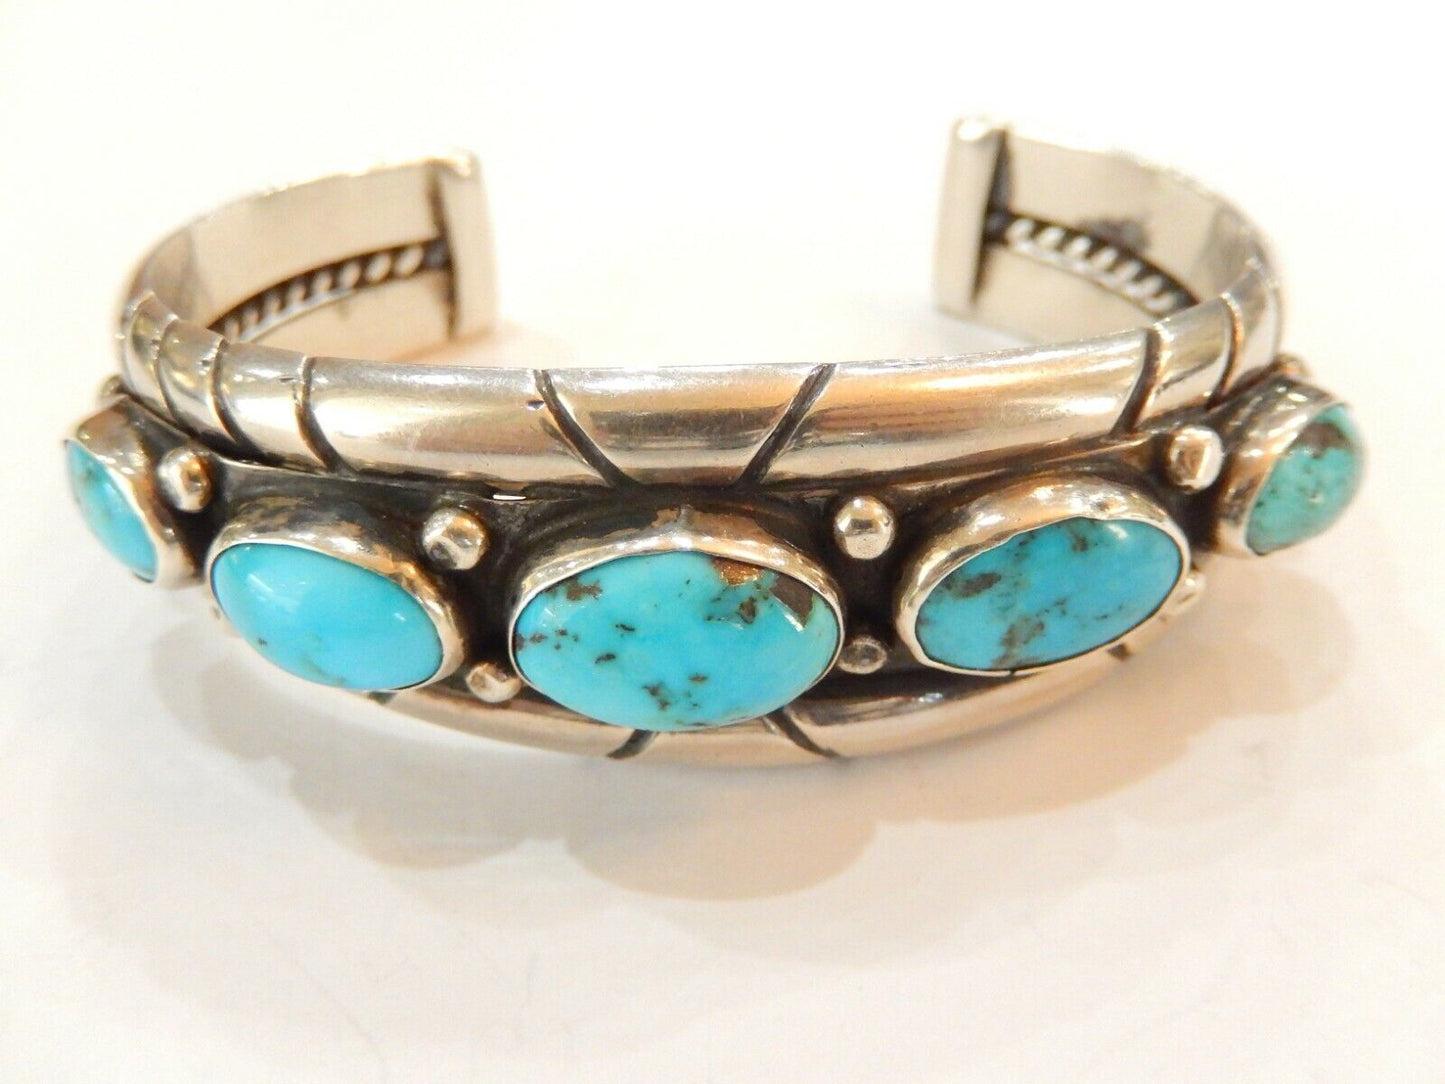 HEAVY 72.4gm Native American Navajo Turquoise Sterling Silver Cuff Bracelet